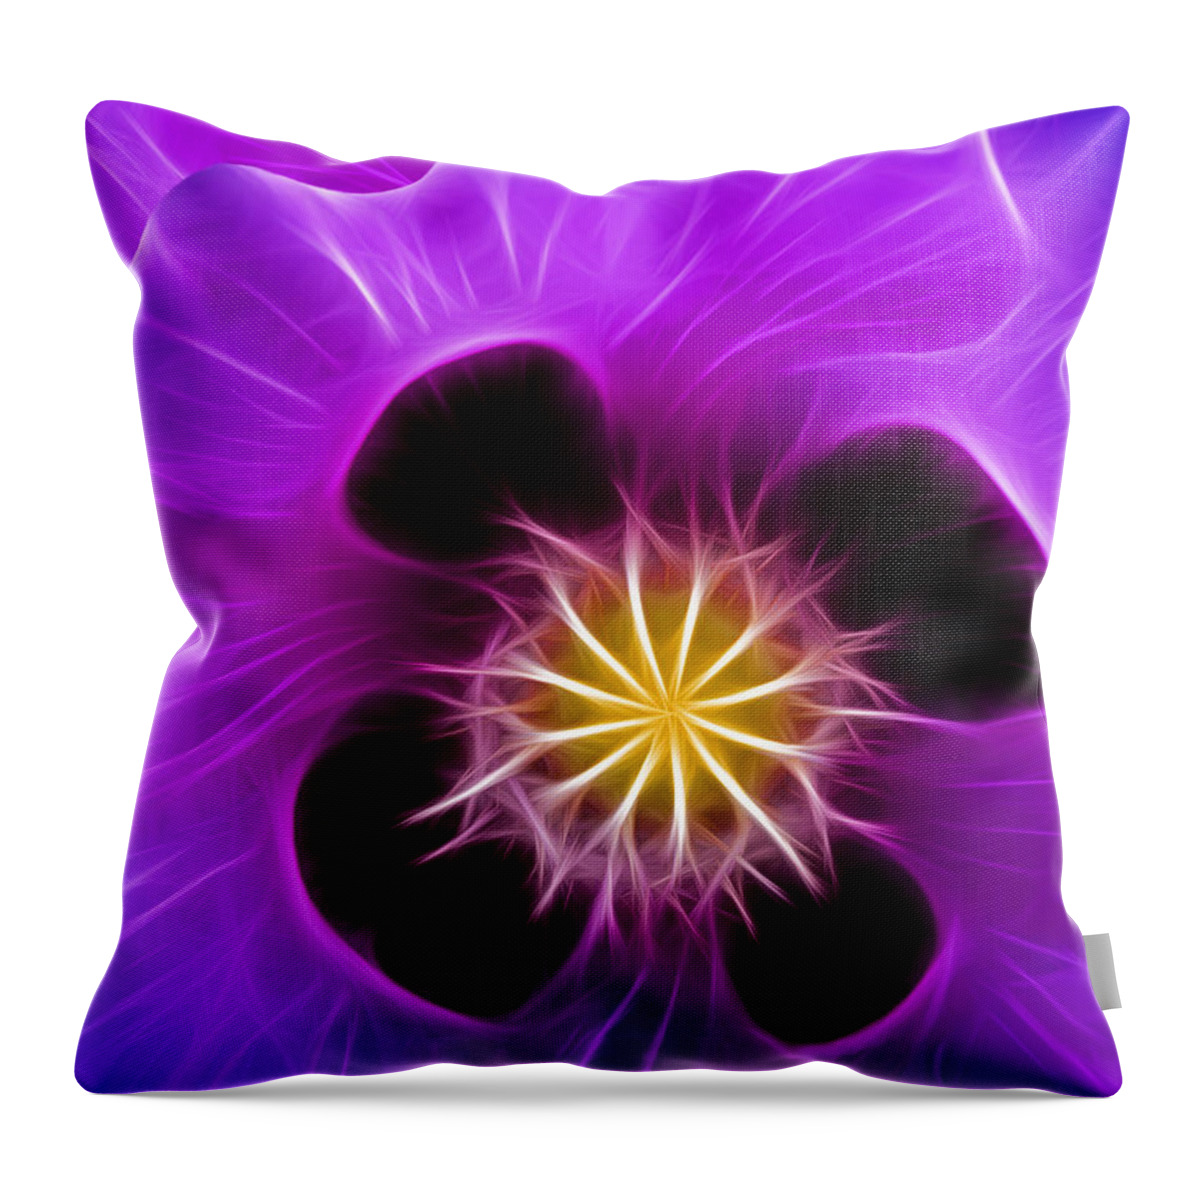 Poppy Throw Pillow featuring the digital art Lilac Poppy by Bel Menpes